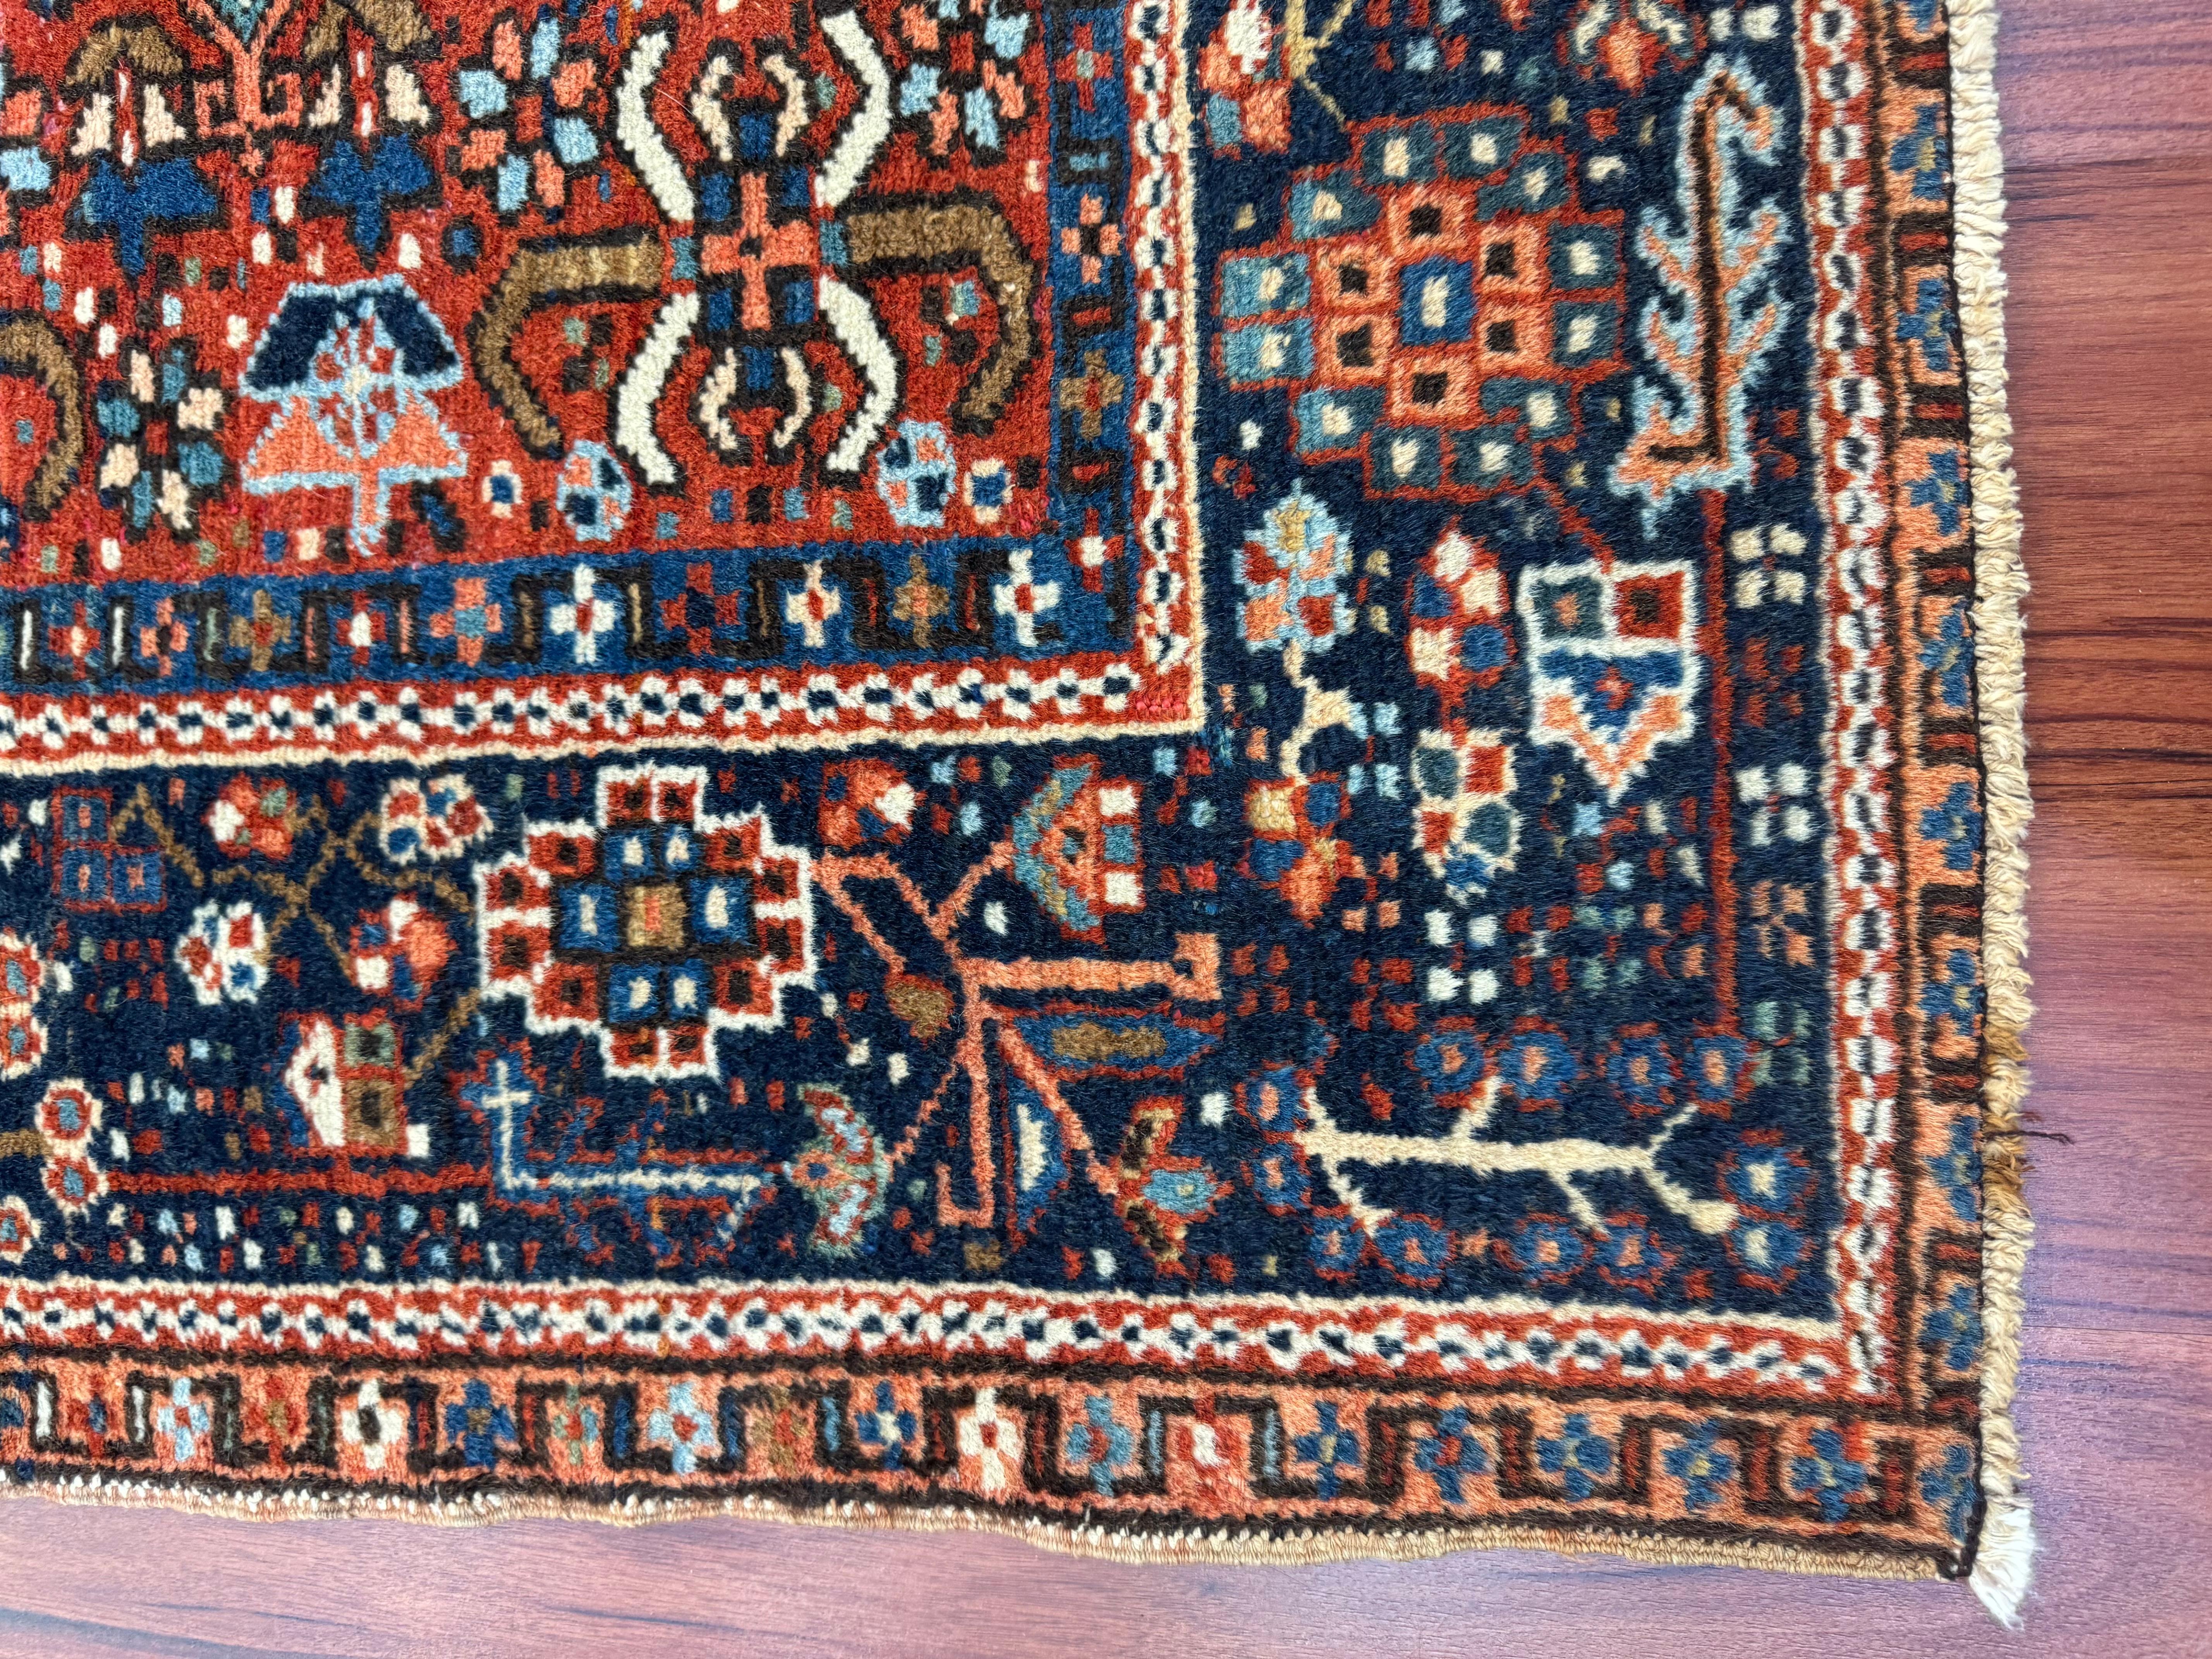 A stunning Antique Persian Karaja Rug that originates from Iran in the 1930s! This rug is in near excellent condition considering its rich history and has a beautiful combination of colors to match its design!